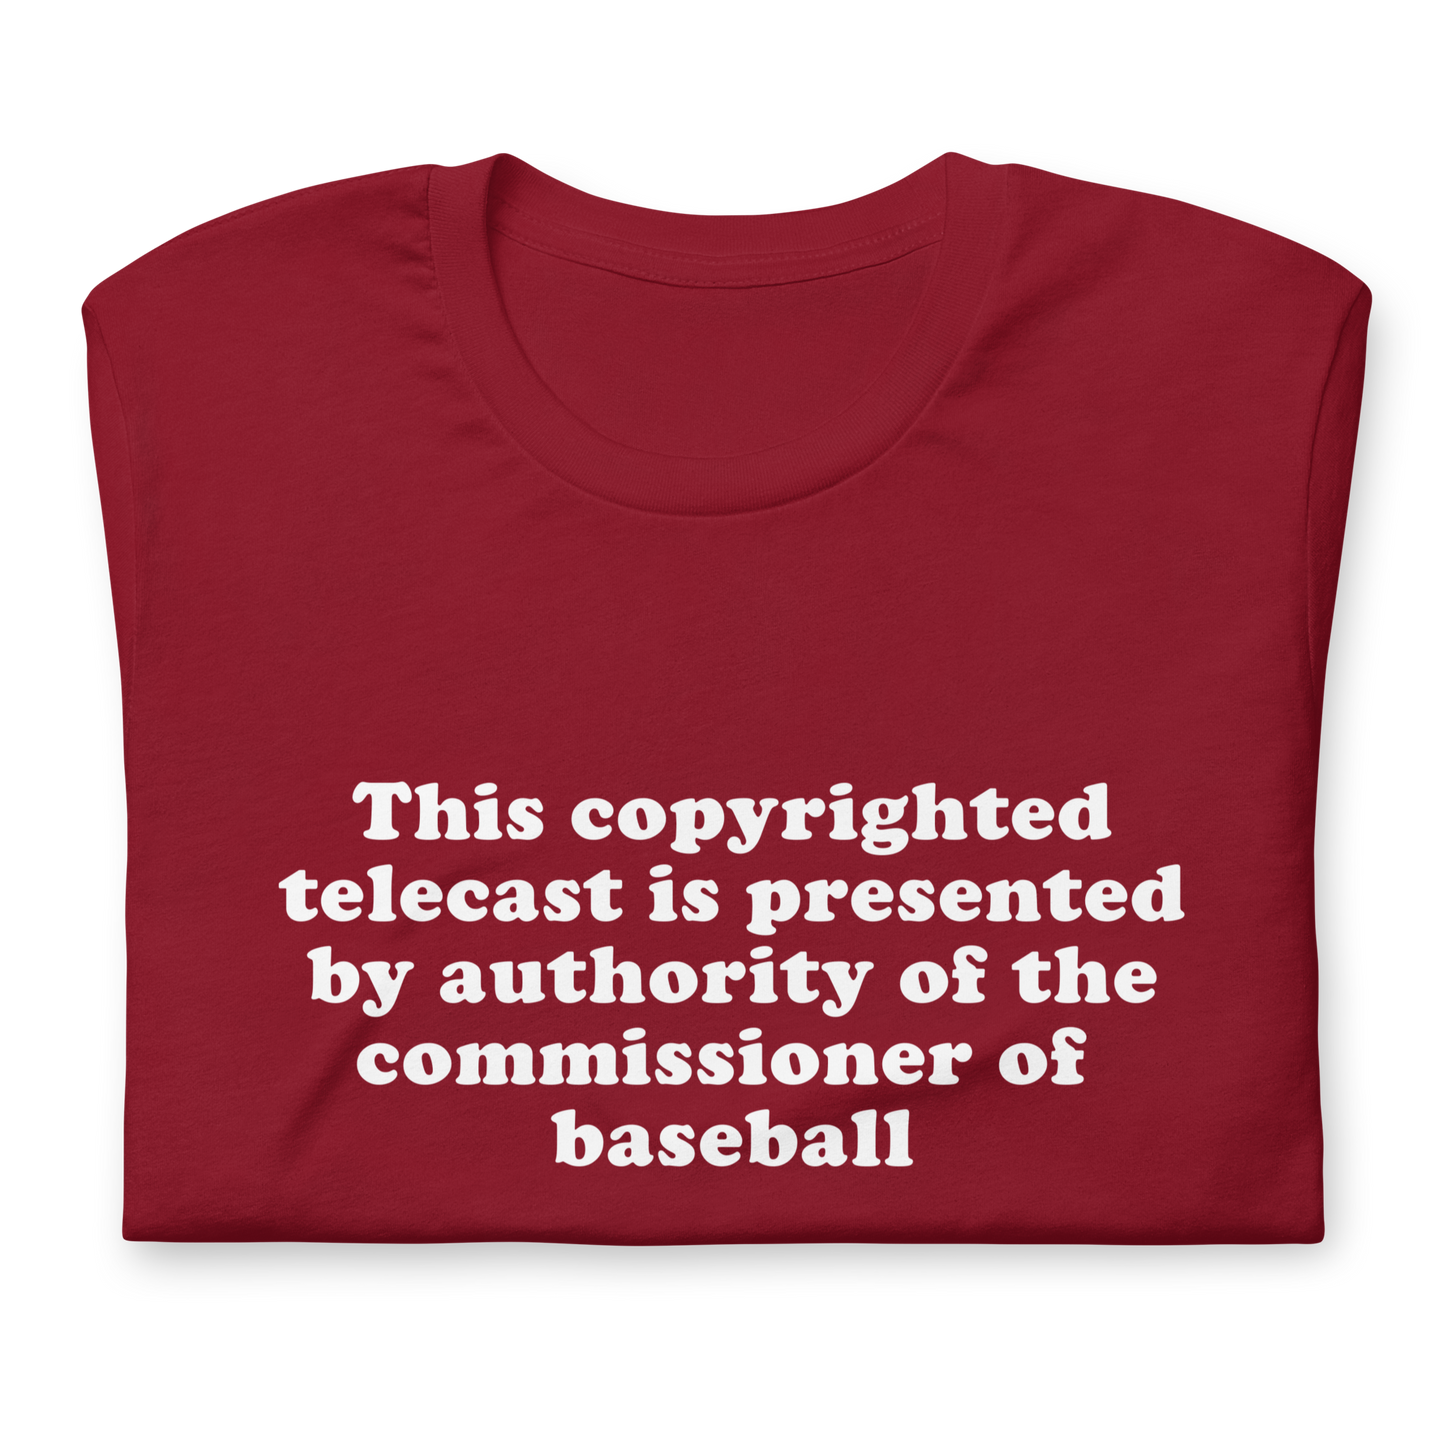 By Authority of the Commissioner of Baseball unisex t-shirt